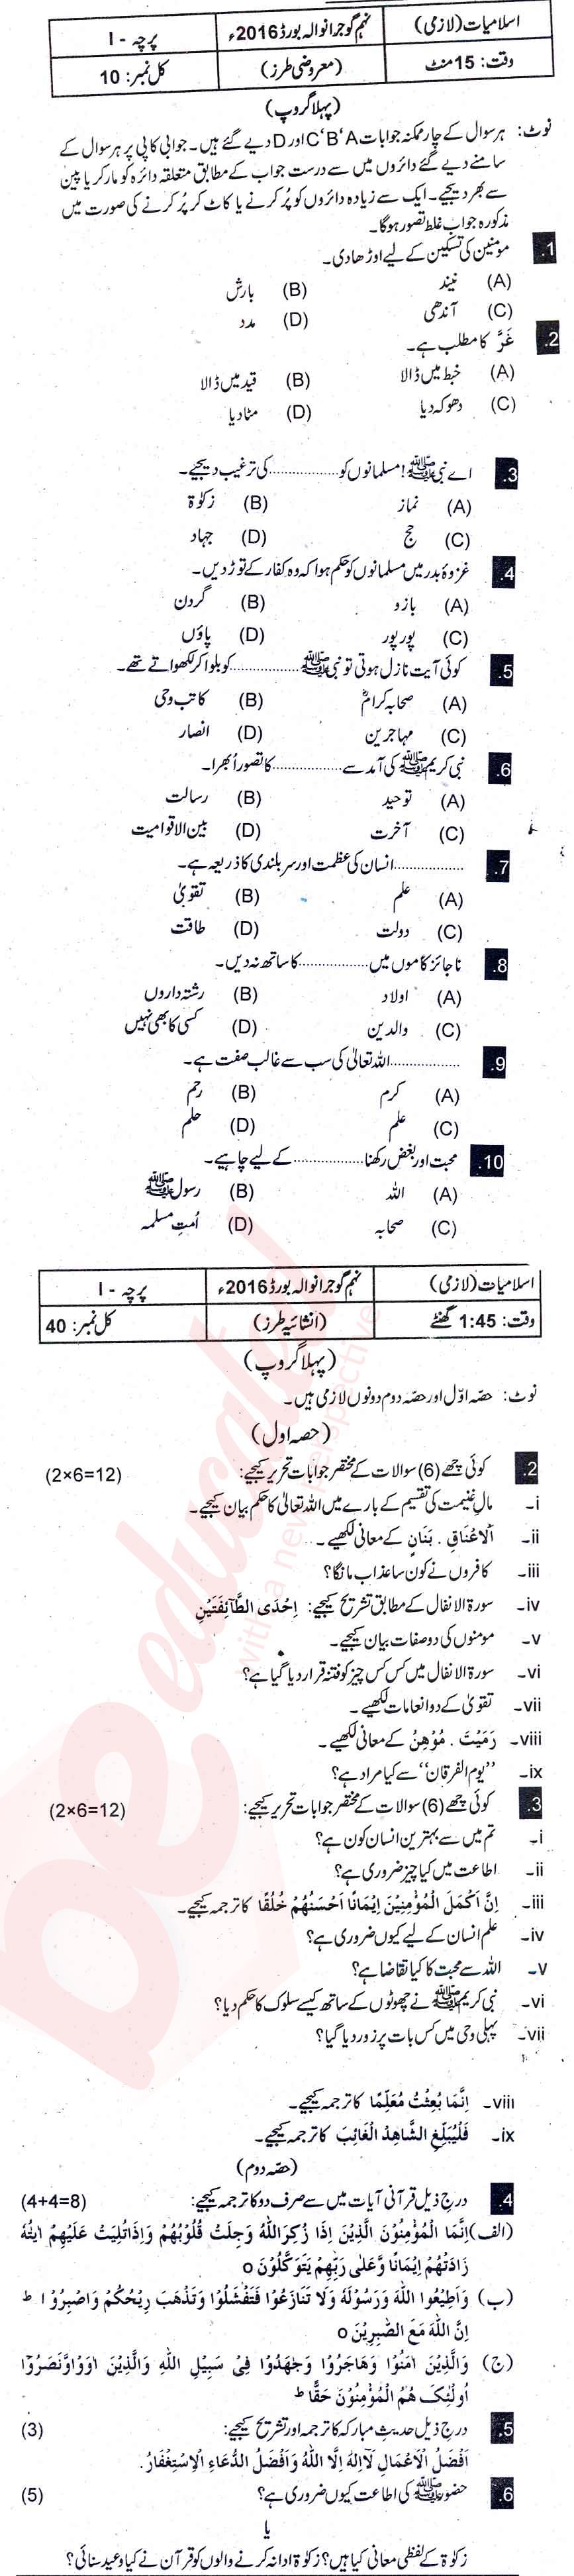 Islamiat (Compulsory) 9th class Past Paper Group 1 BISE Gujranwala 2016